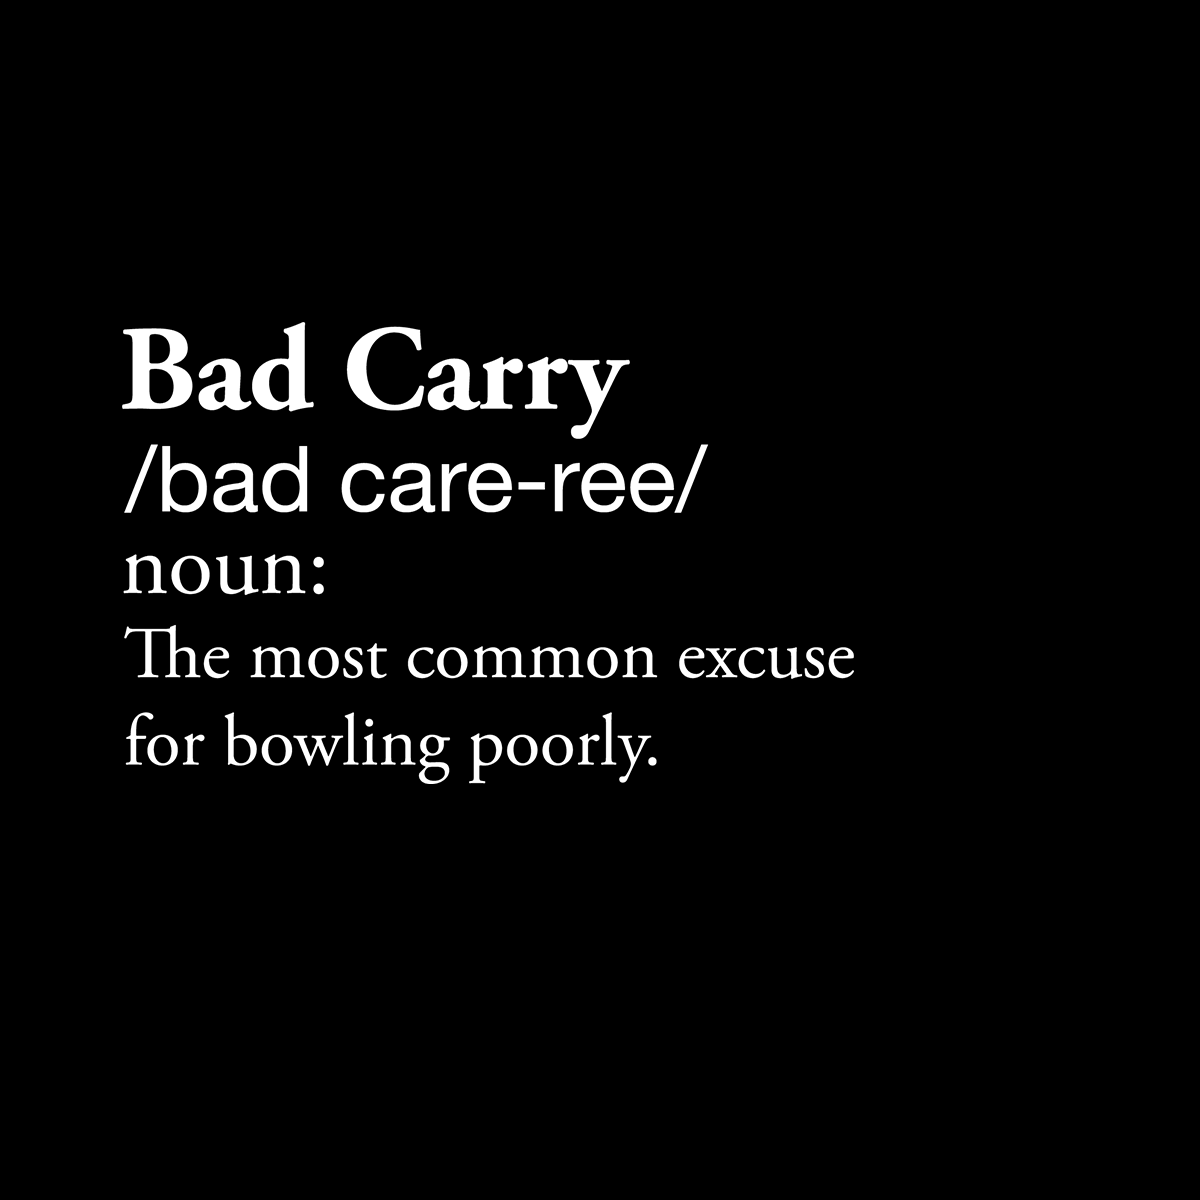 Bad Carry